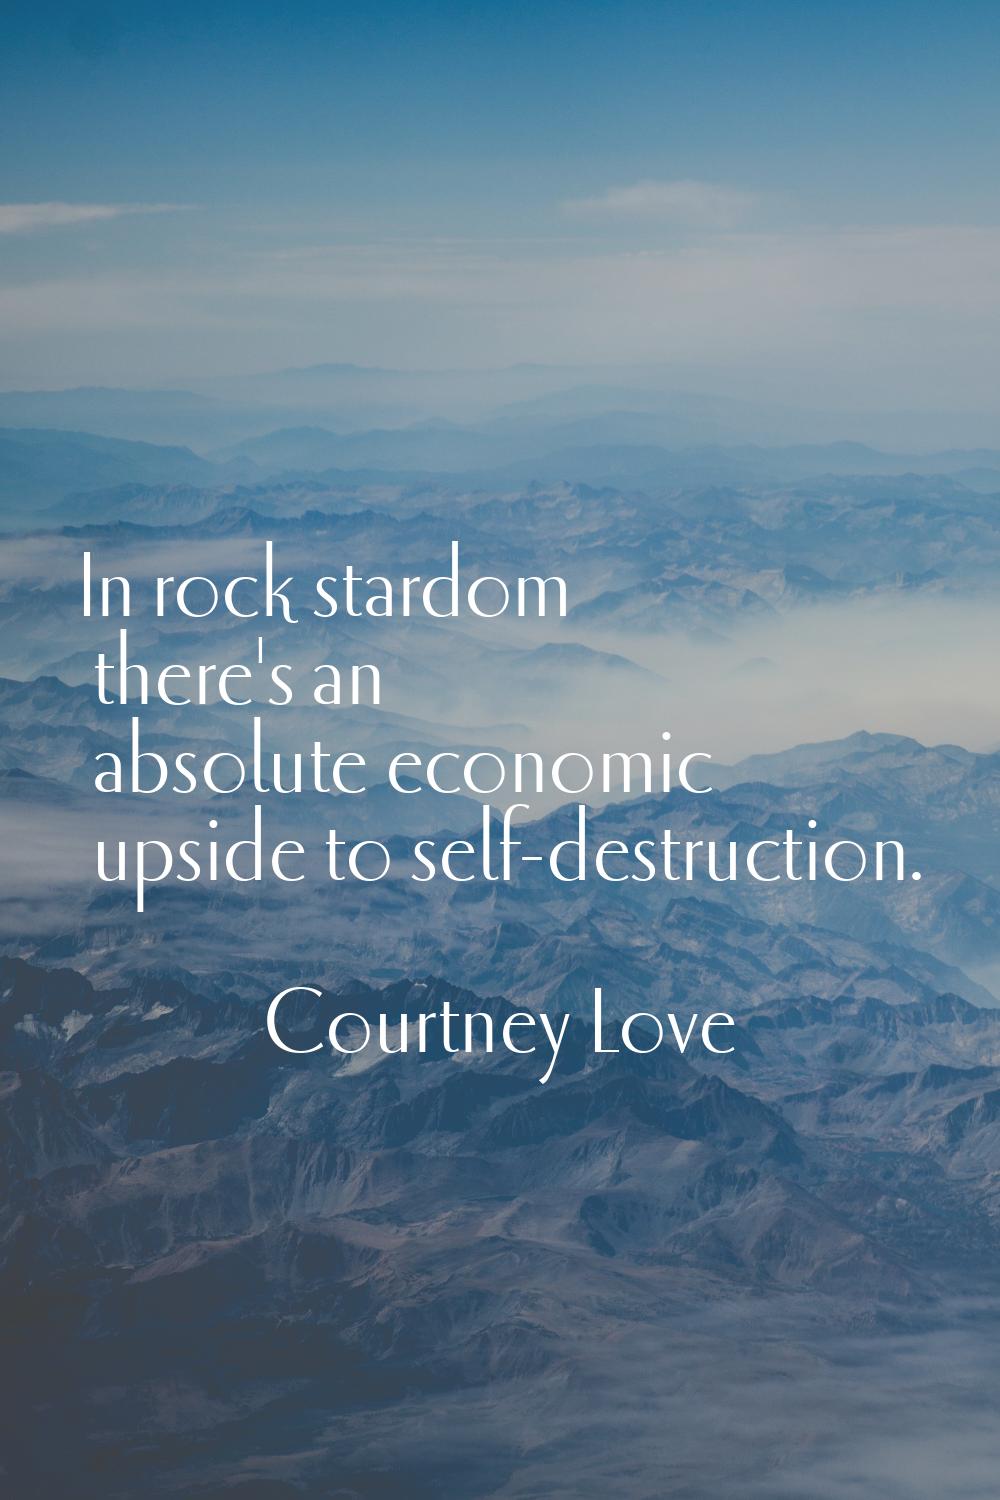 In rock stardom there's an absolute economic upside to self-destruction.